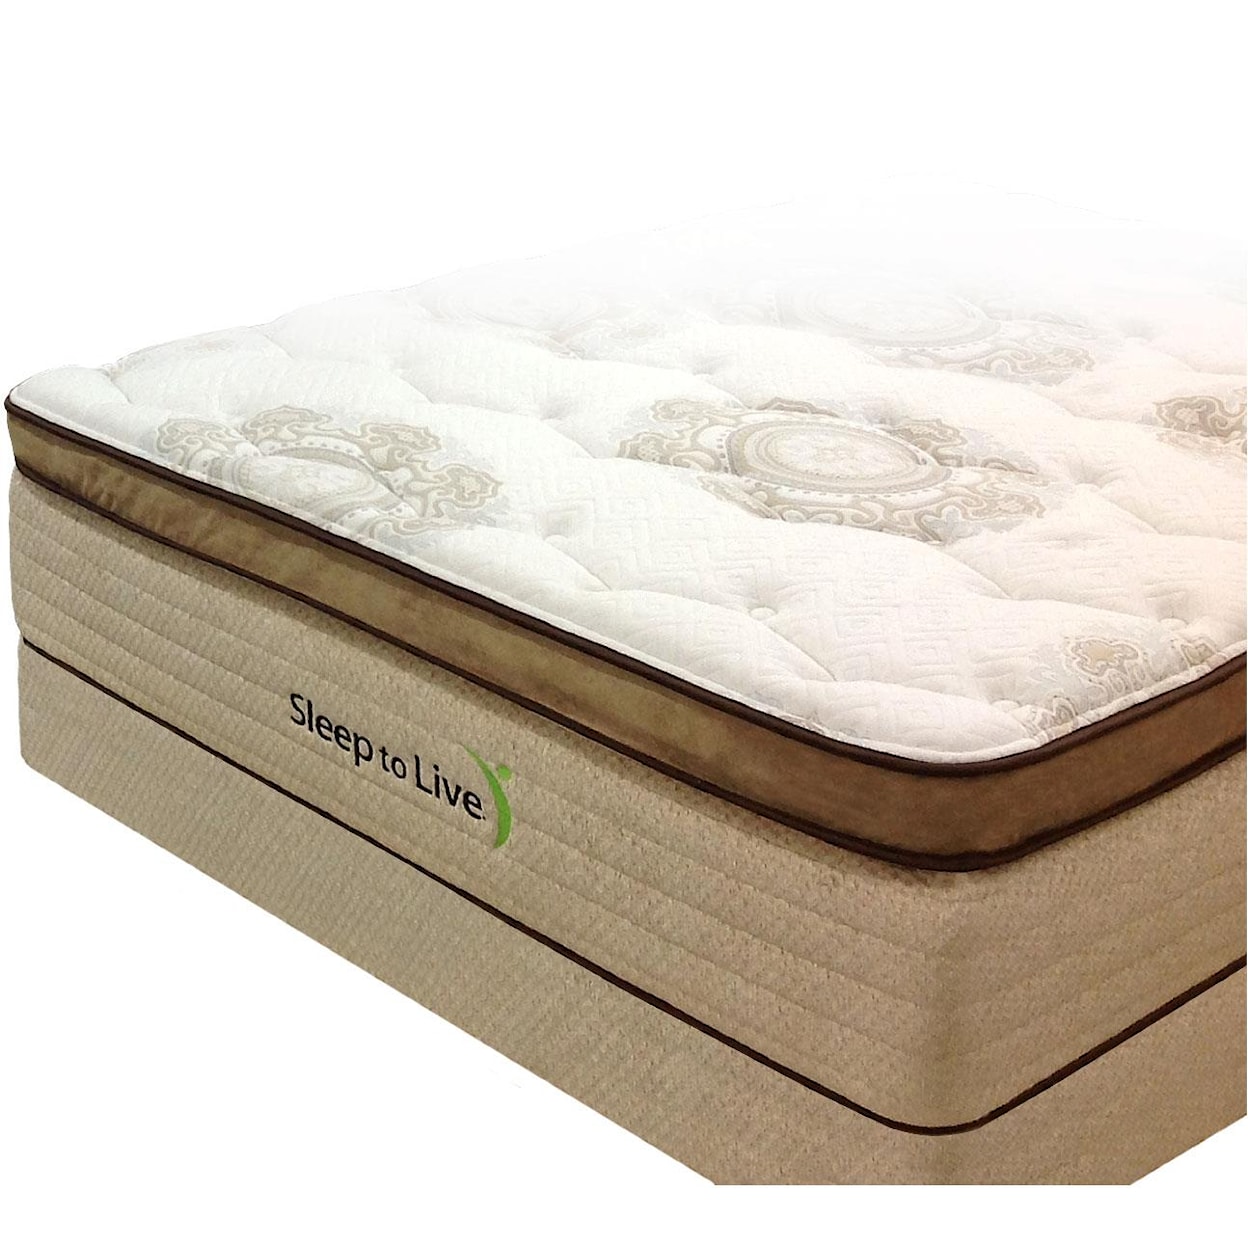 Kingsdown Body System 1 Twin XL Pocketed Coil Mattress